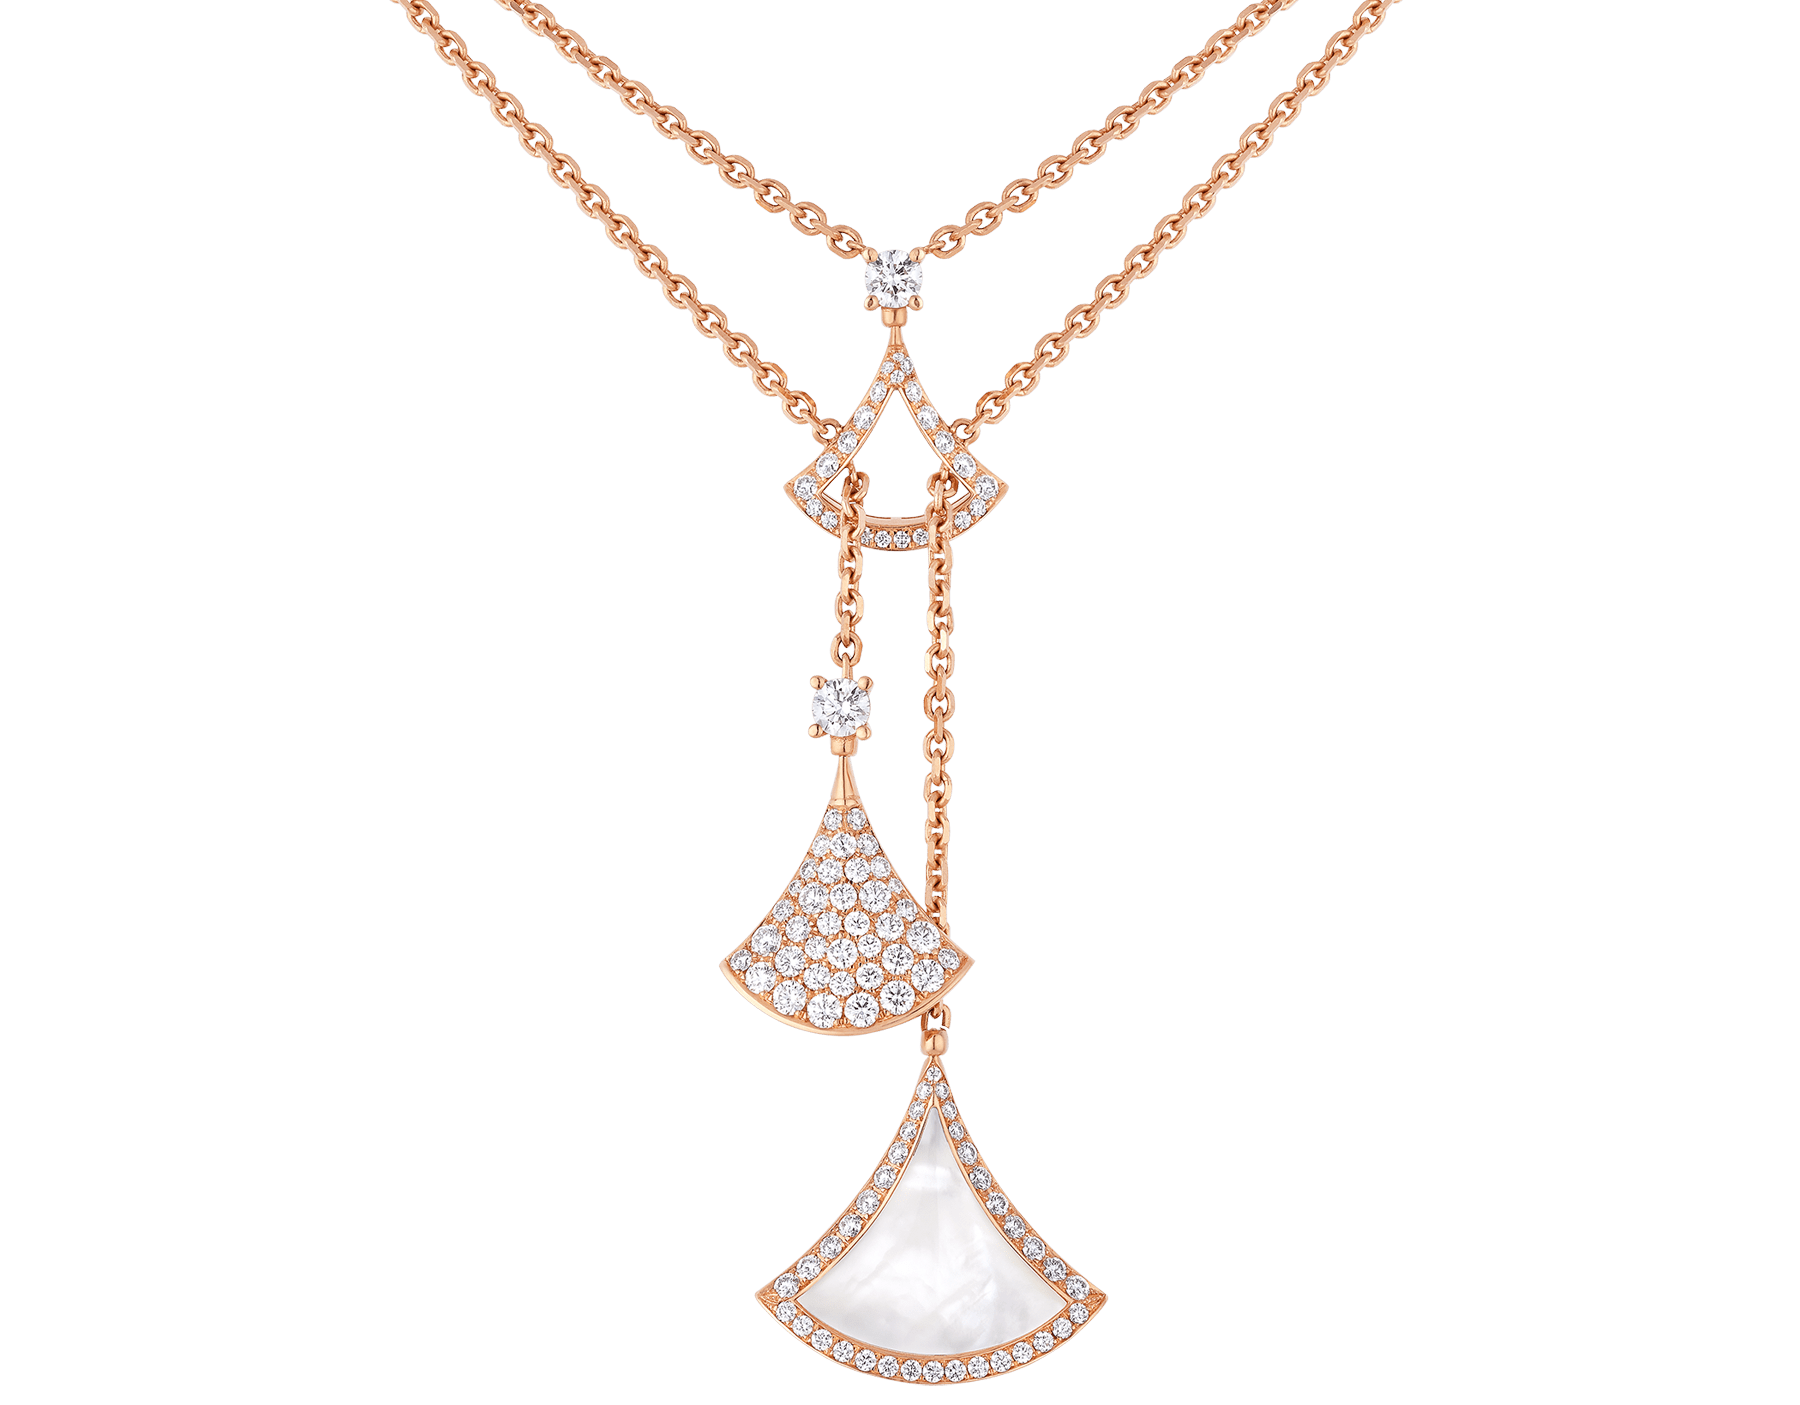 DIVAS' DREAM necklace in 18 kt rose gold with three fan-shaped motifs set with mother-of-pearl element and pavé diamonds 358682 image 1